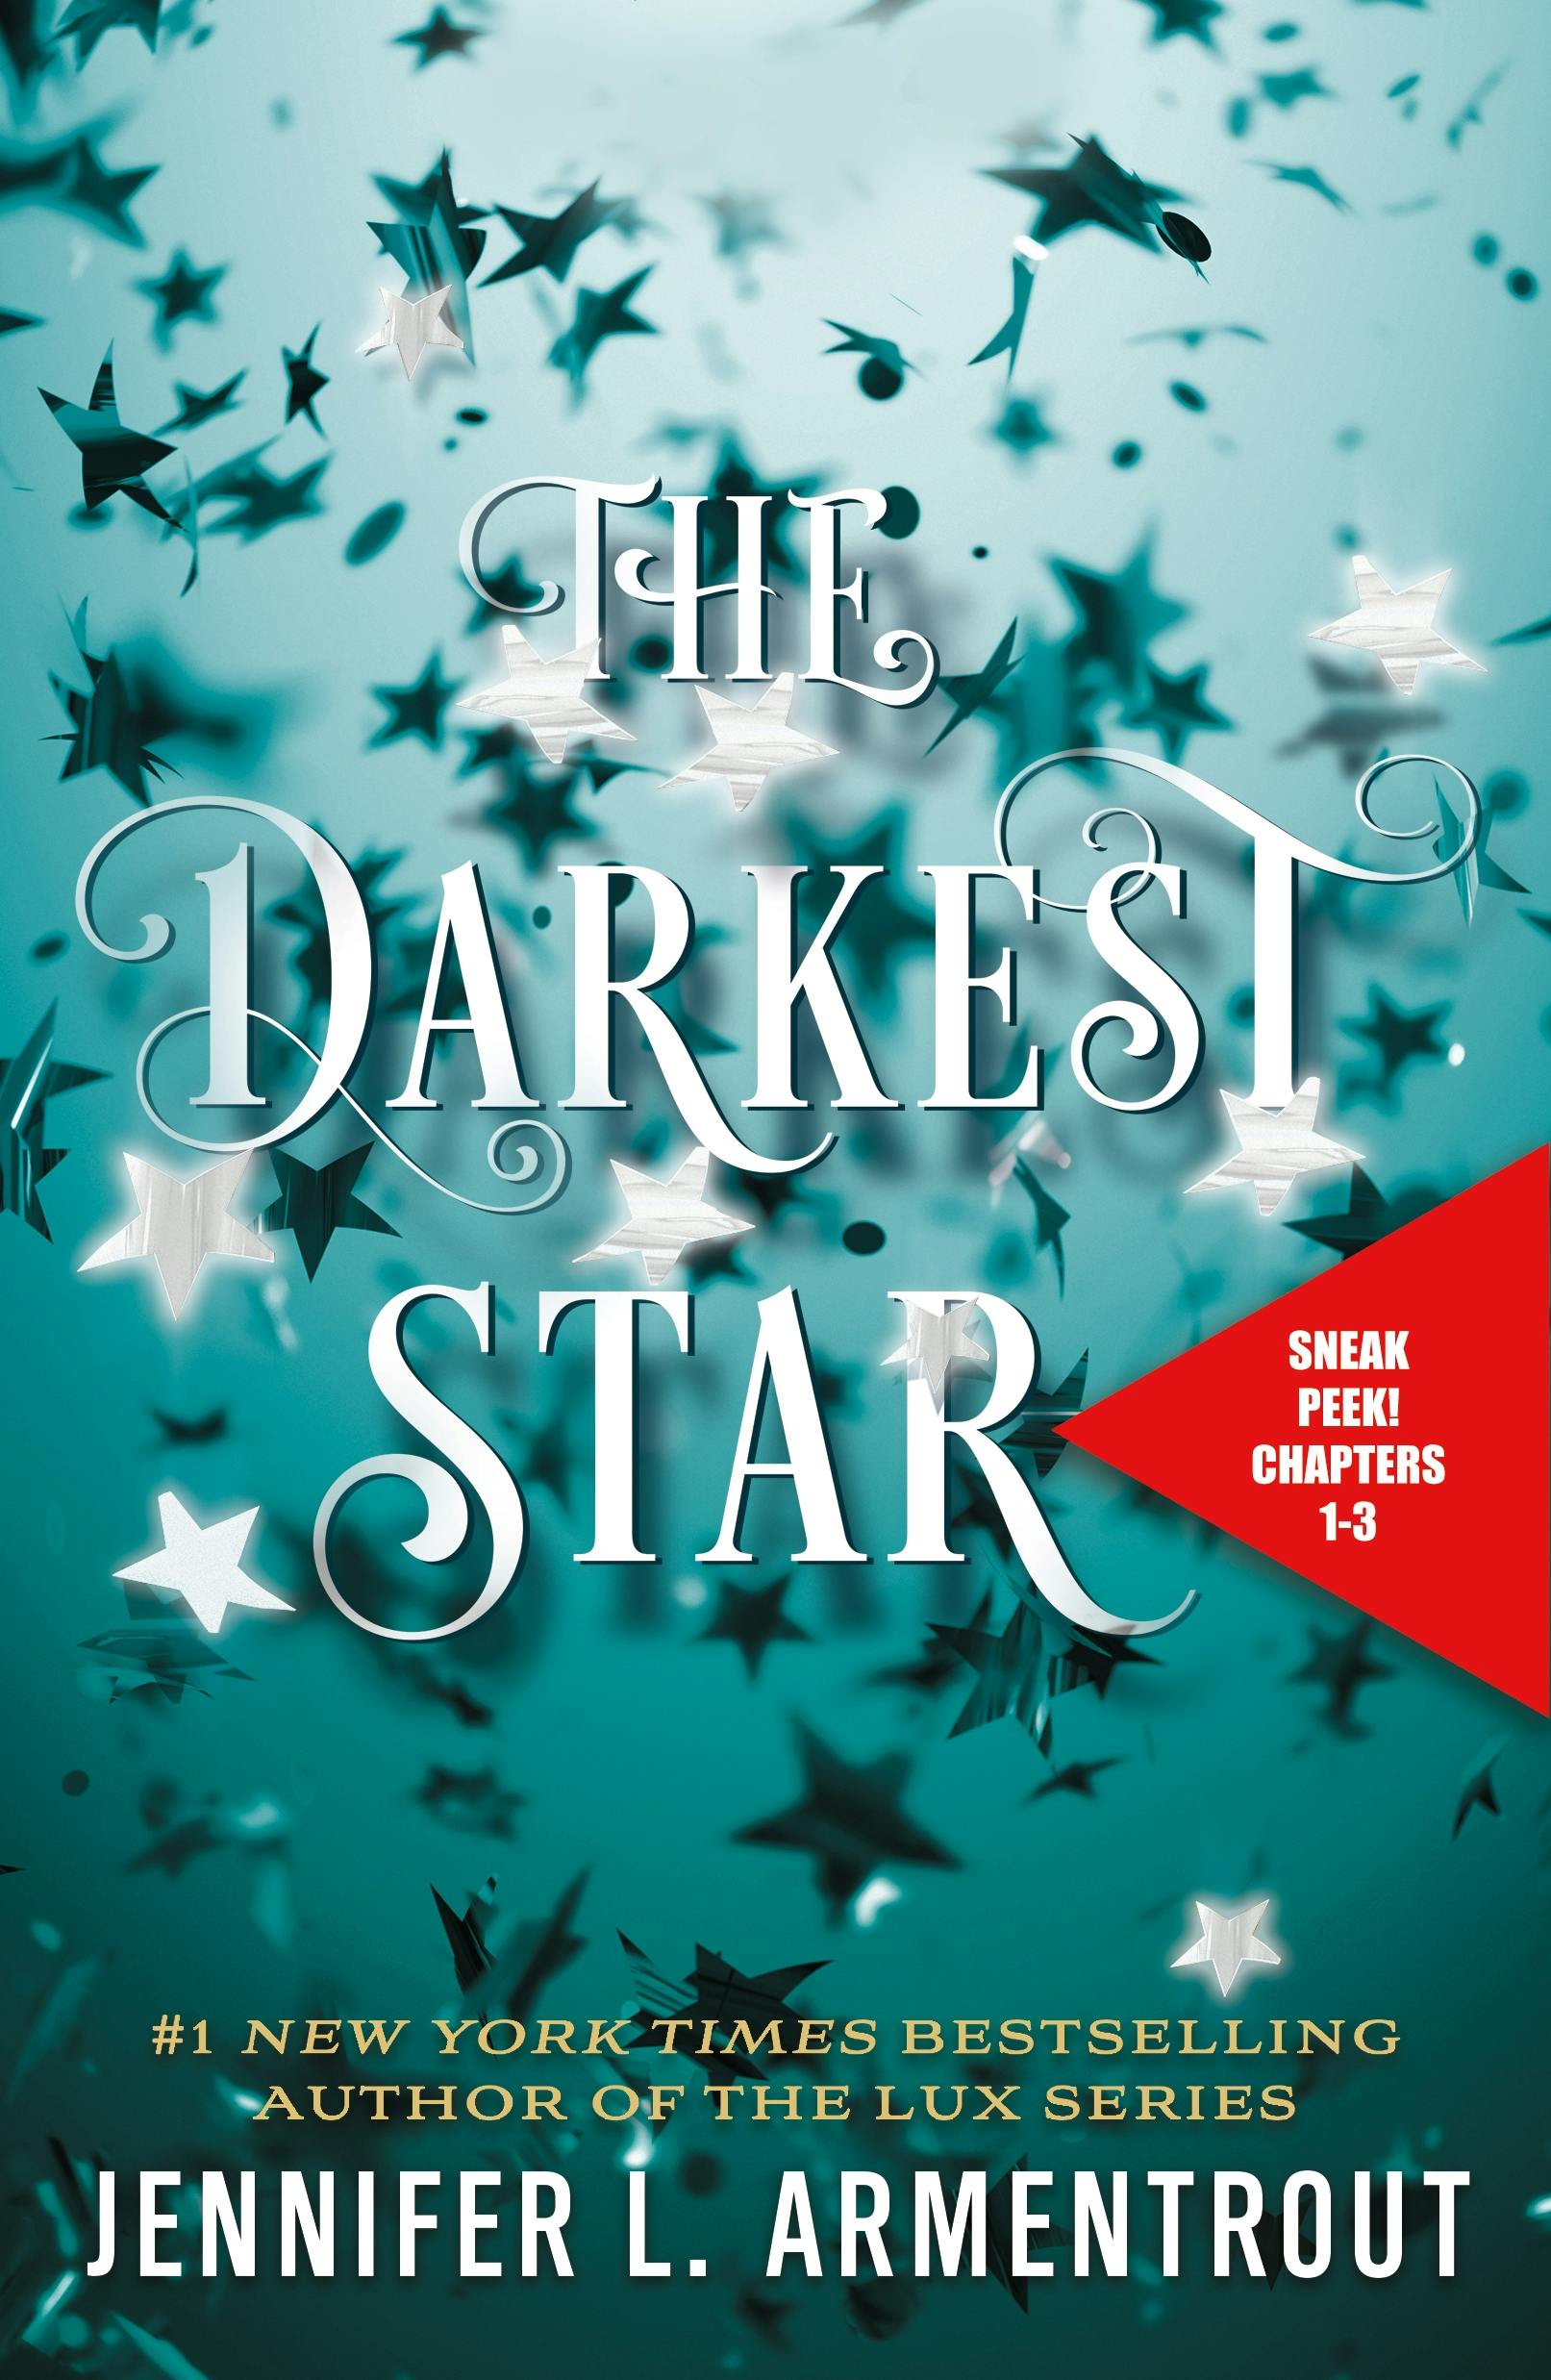 Cover for the book titled as: The Darkest Star Sneak Peek: Chapters 1-3